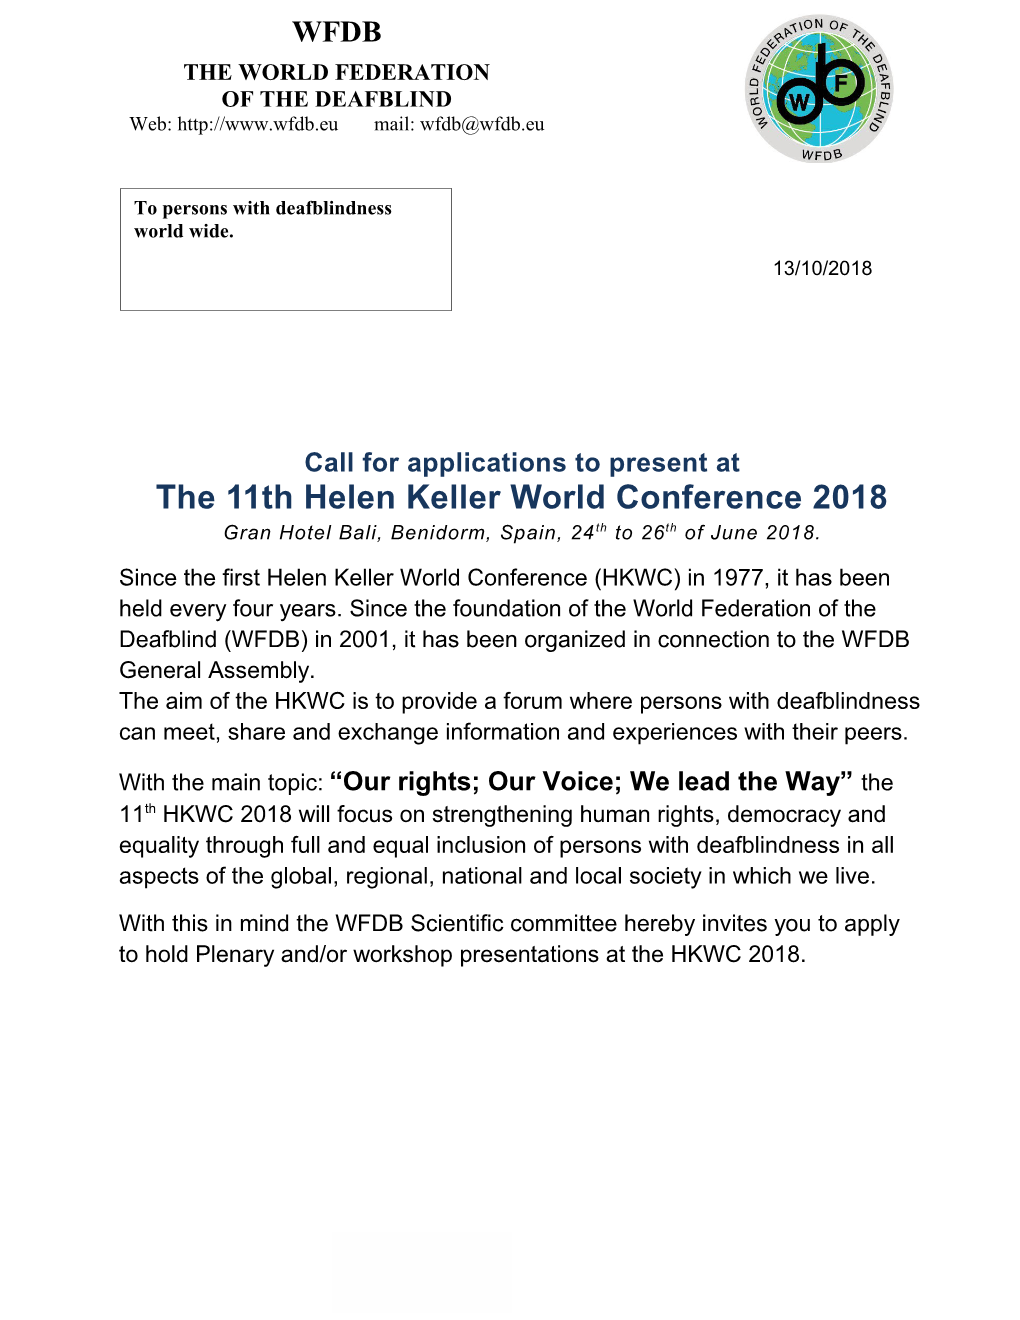 Call for Applications to Present at the 11Th Helen Keller World Conference 2018